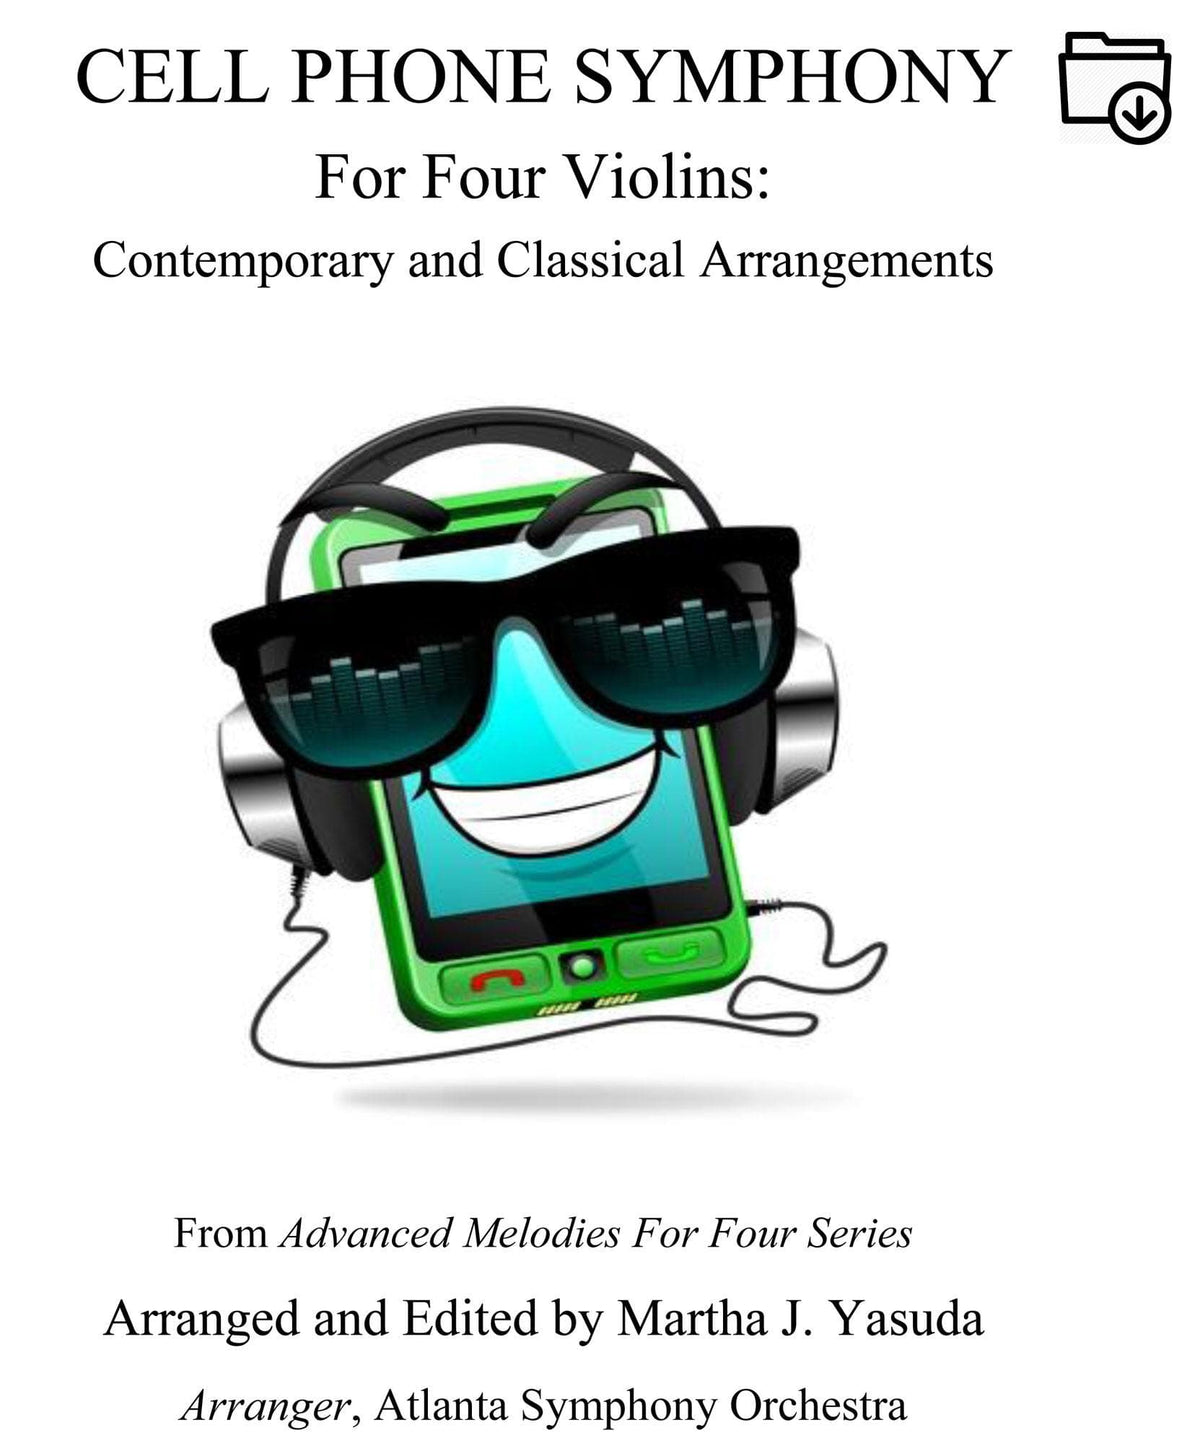 Yasuda, Martha - Cell Phone Symphony and American Melodies for Four Violins - Digital Download